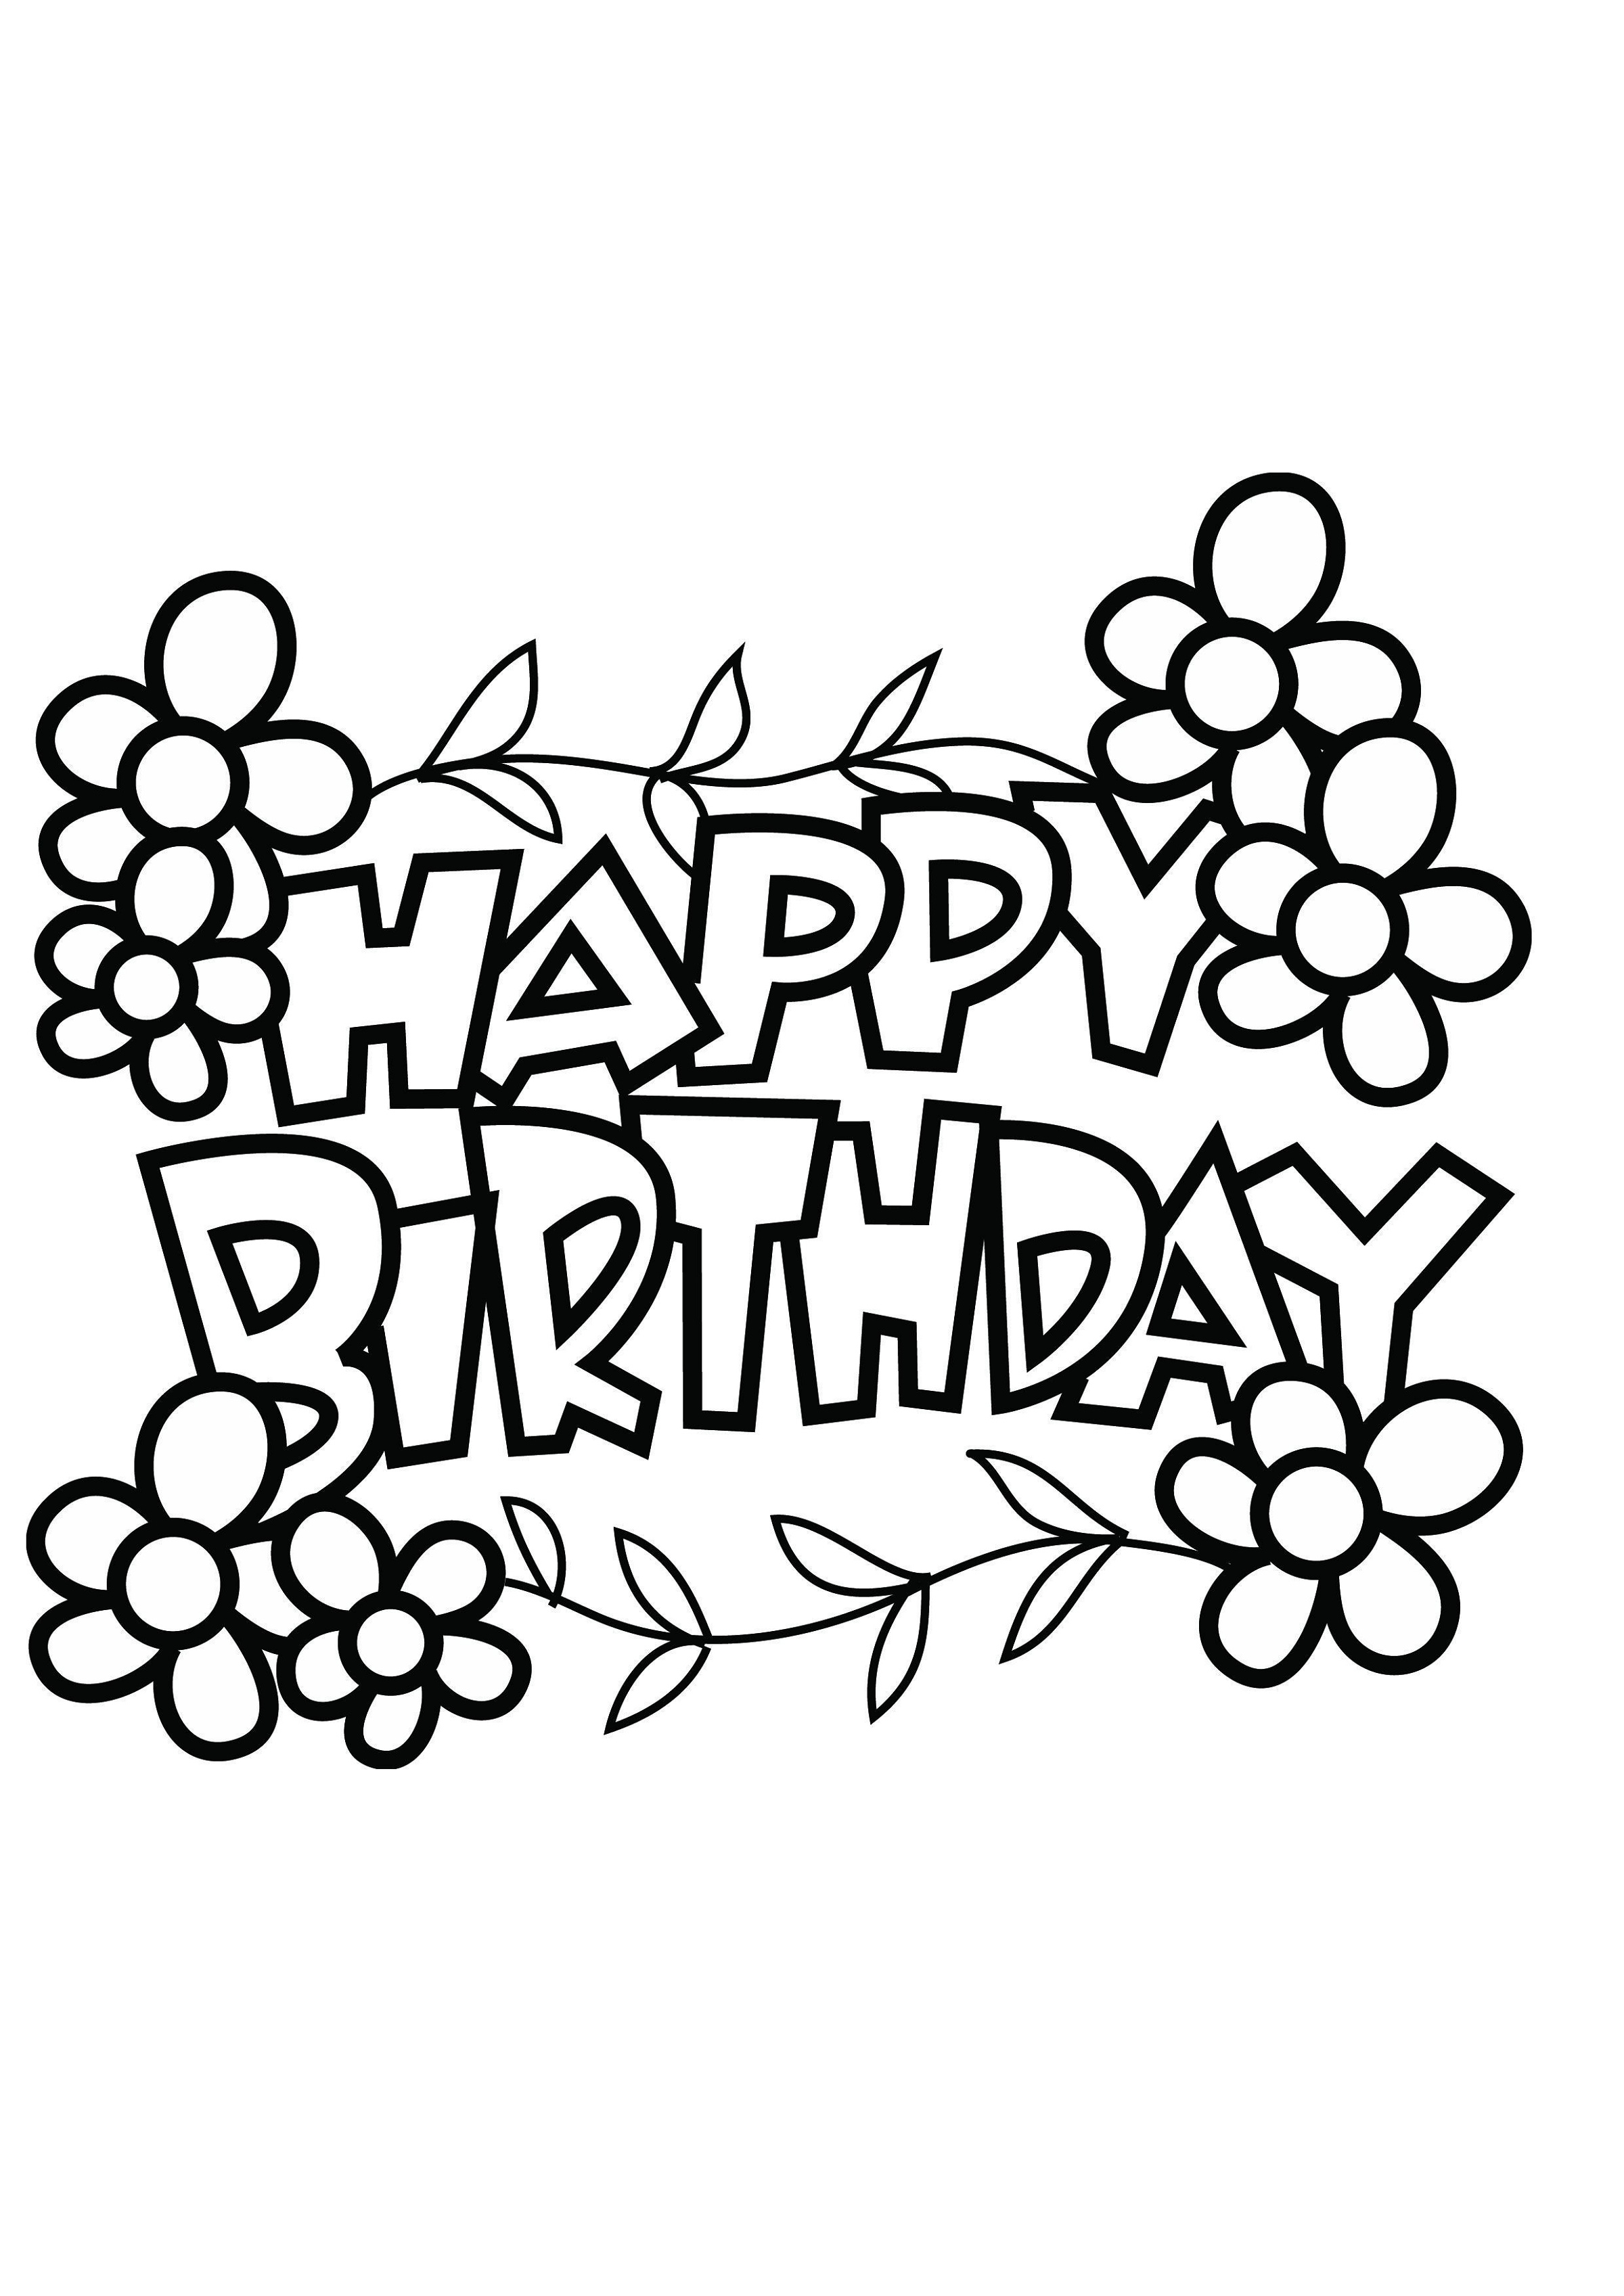 Happy Birthday Coloring Pages To Print